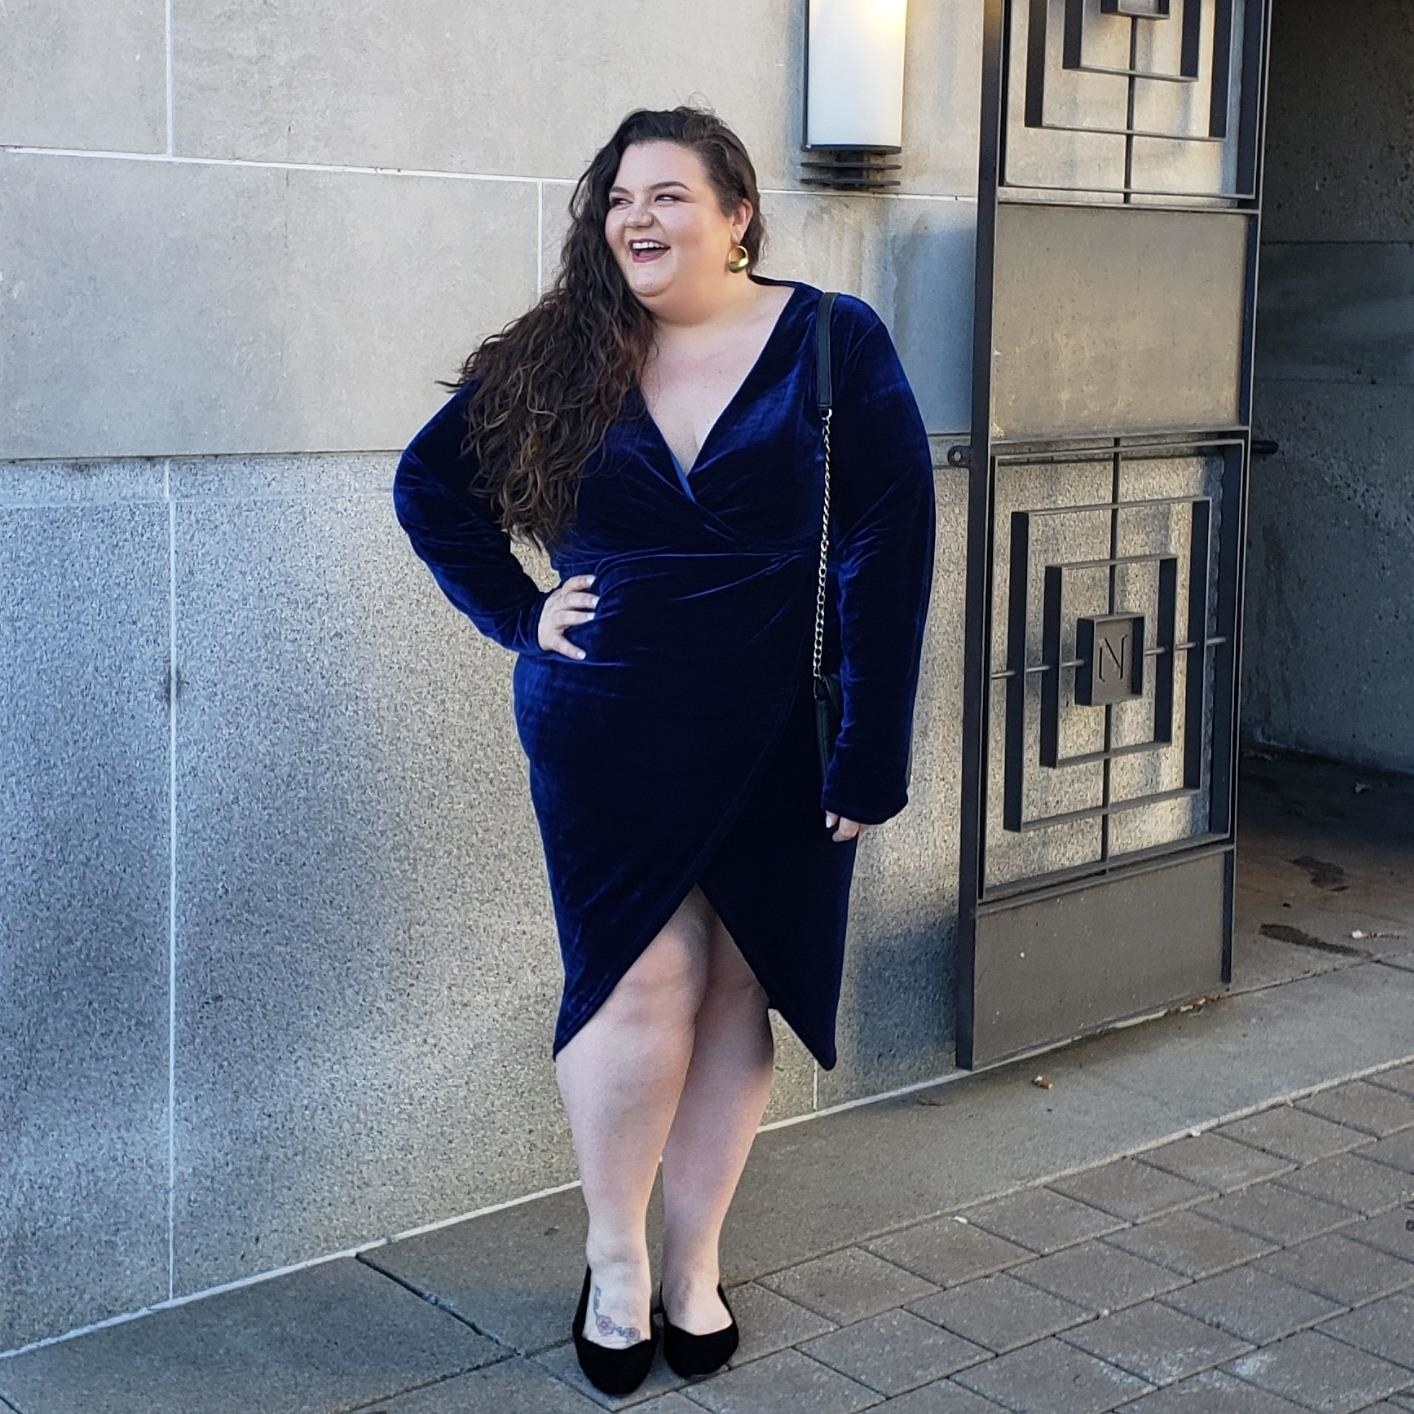 A reviewer in the navy wrap dress